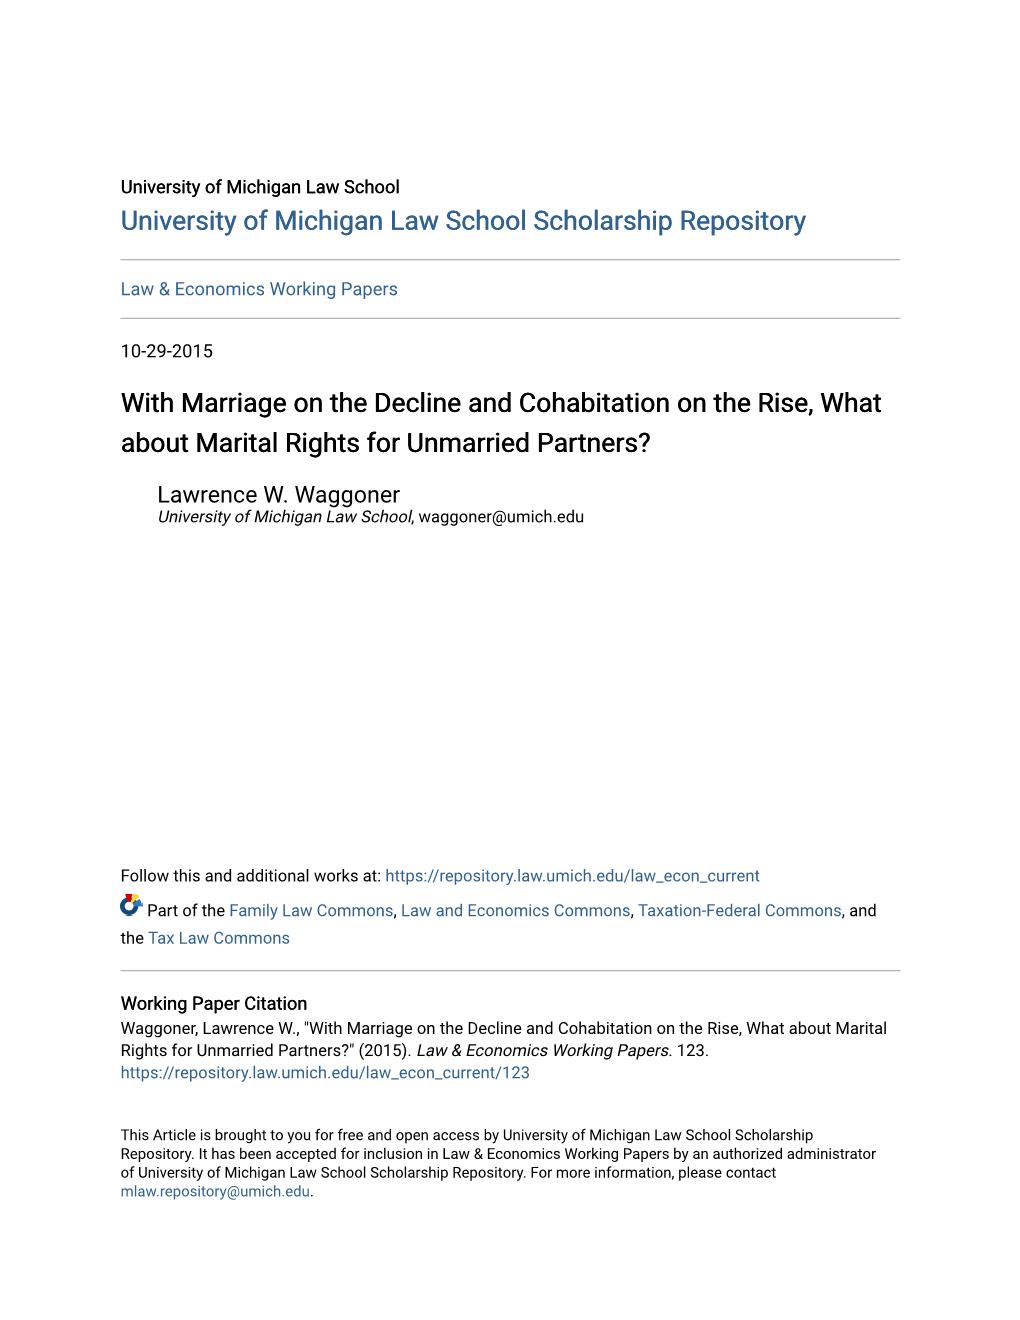 With Marriage on the Decline and Cohabitation on the Rise, What About Marital Rights for Unmarried Partners?